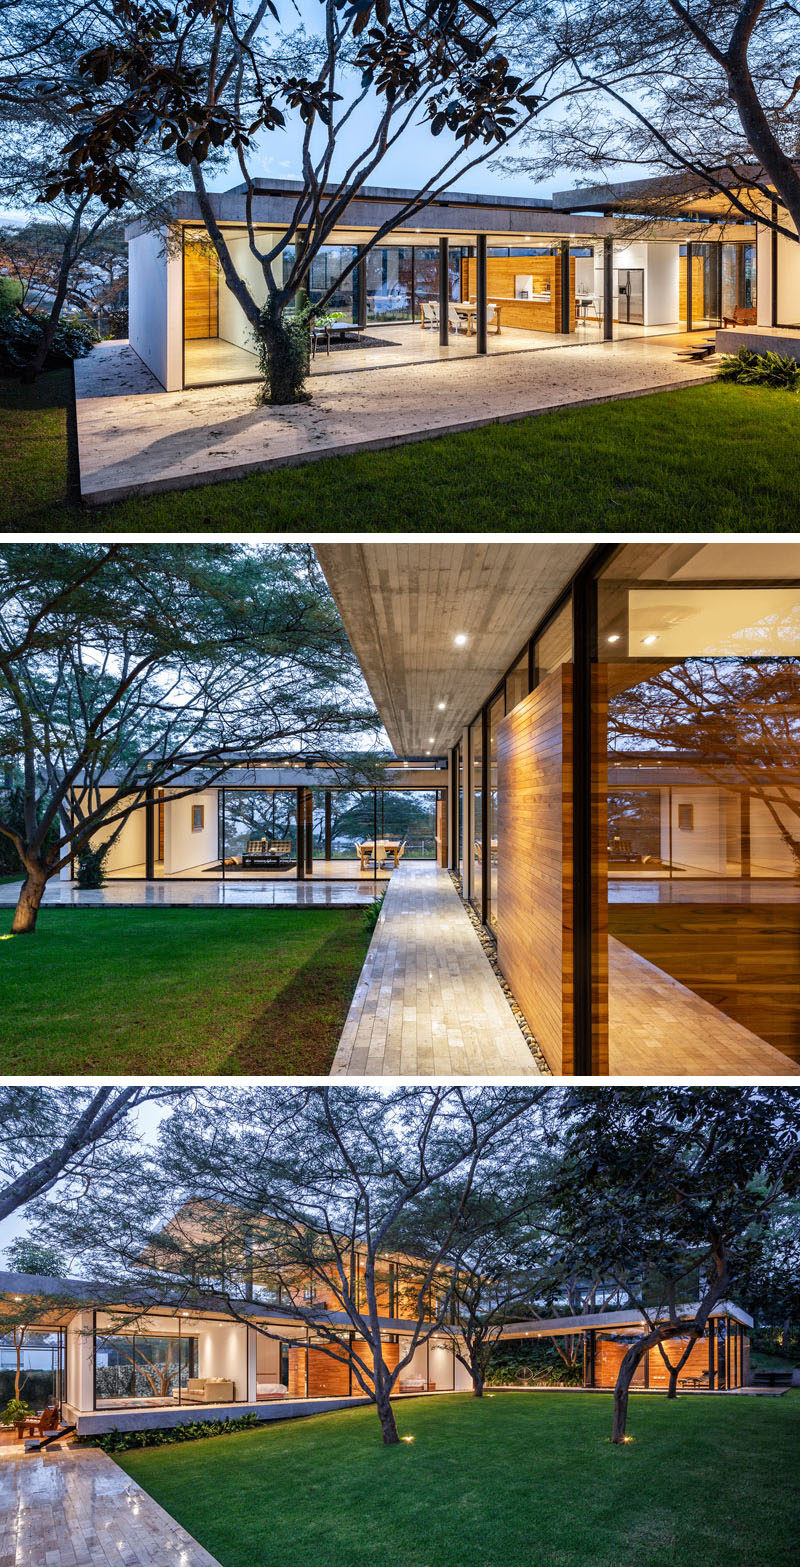 The interiors of this modern house open to a courtyard that showcases the natural topography and the original Algarrobos trees that were on the site. #Architecture #Landscaping #ModernHouse